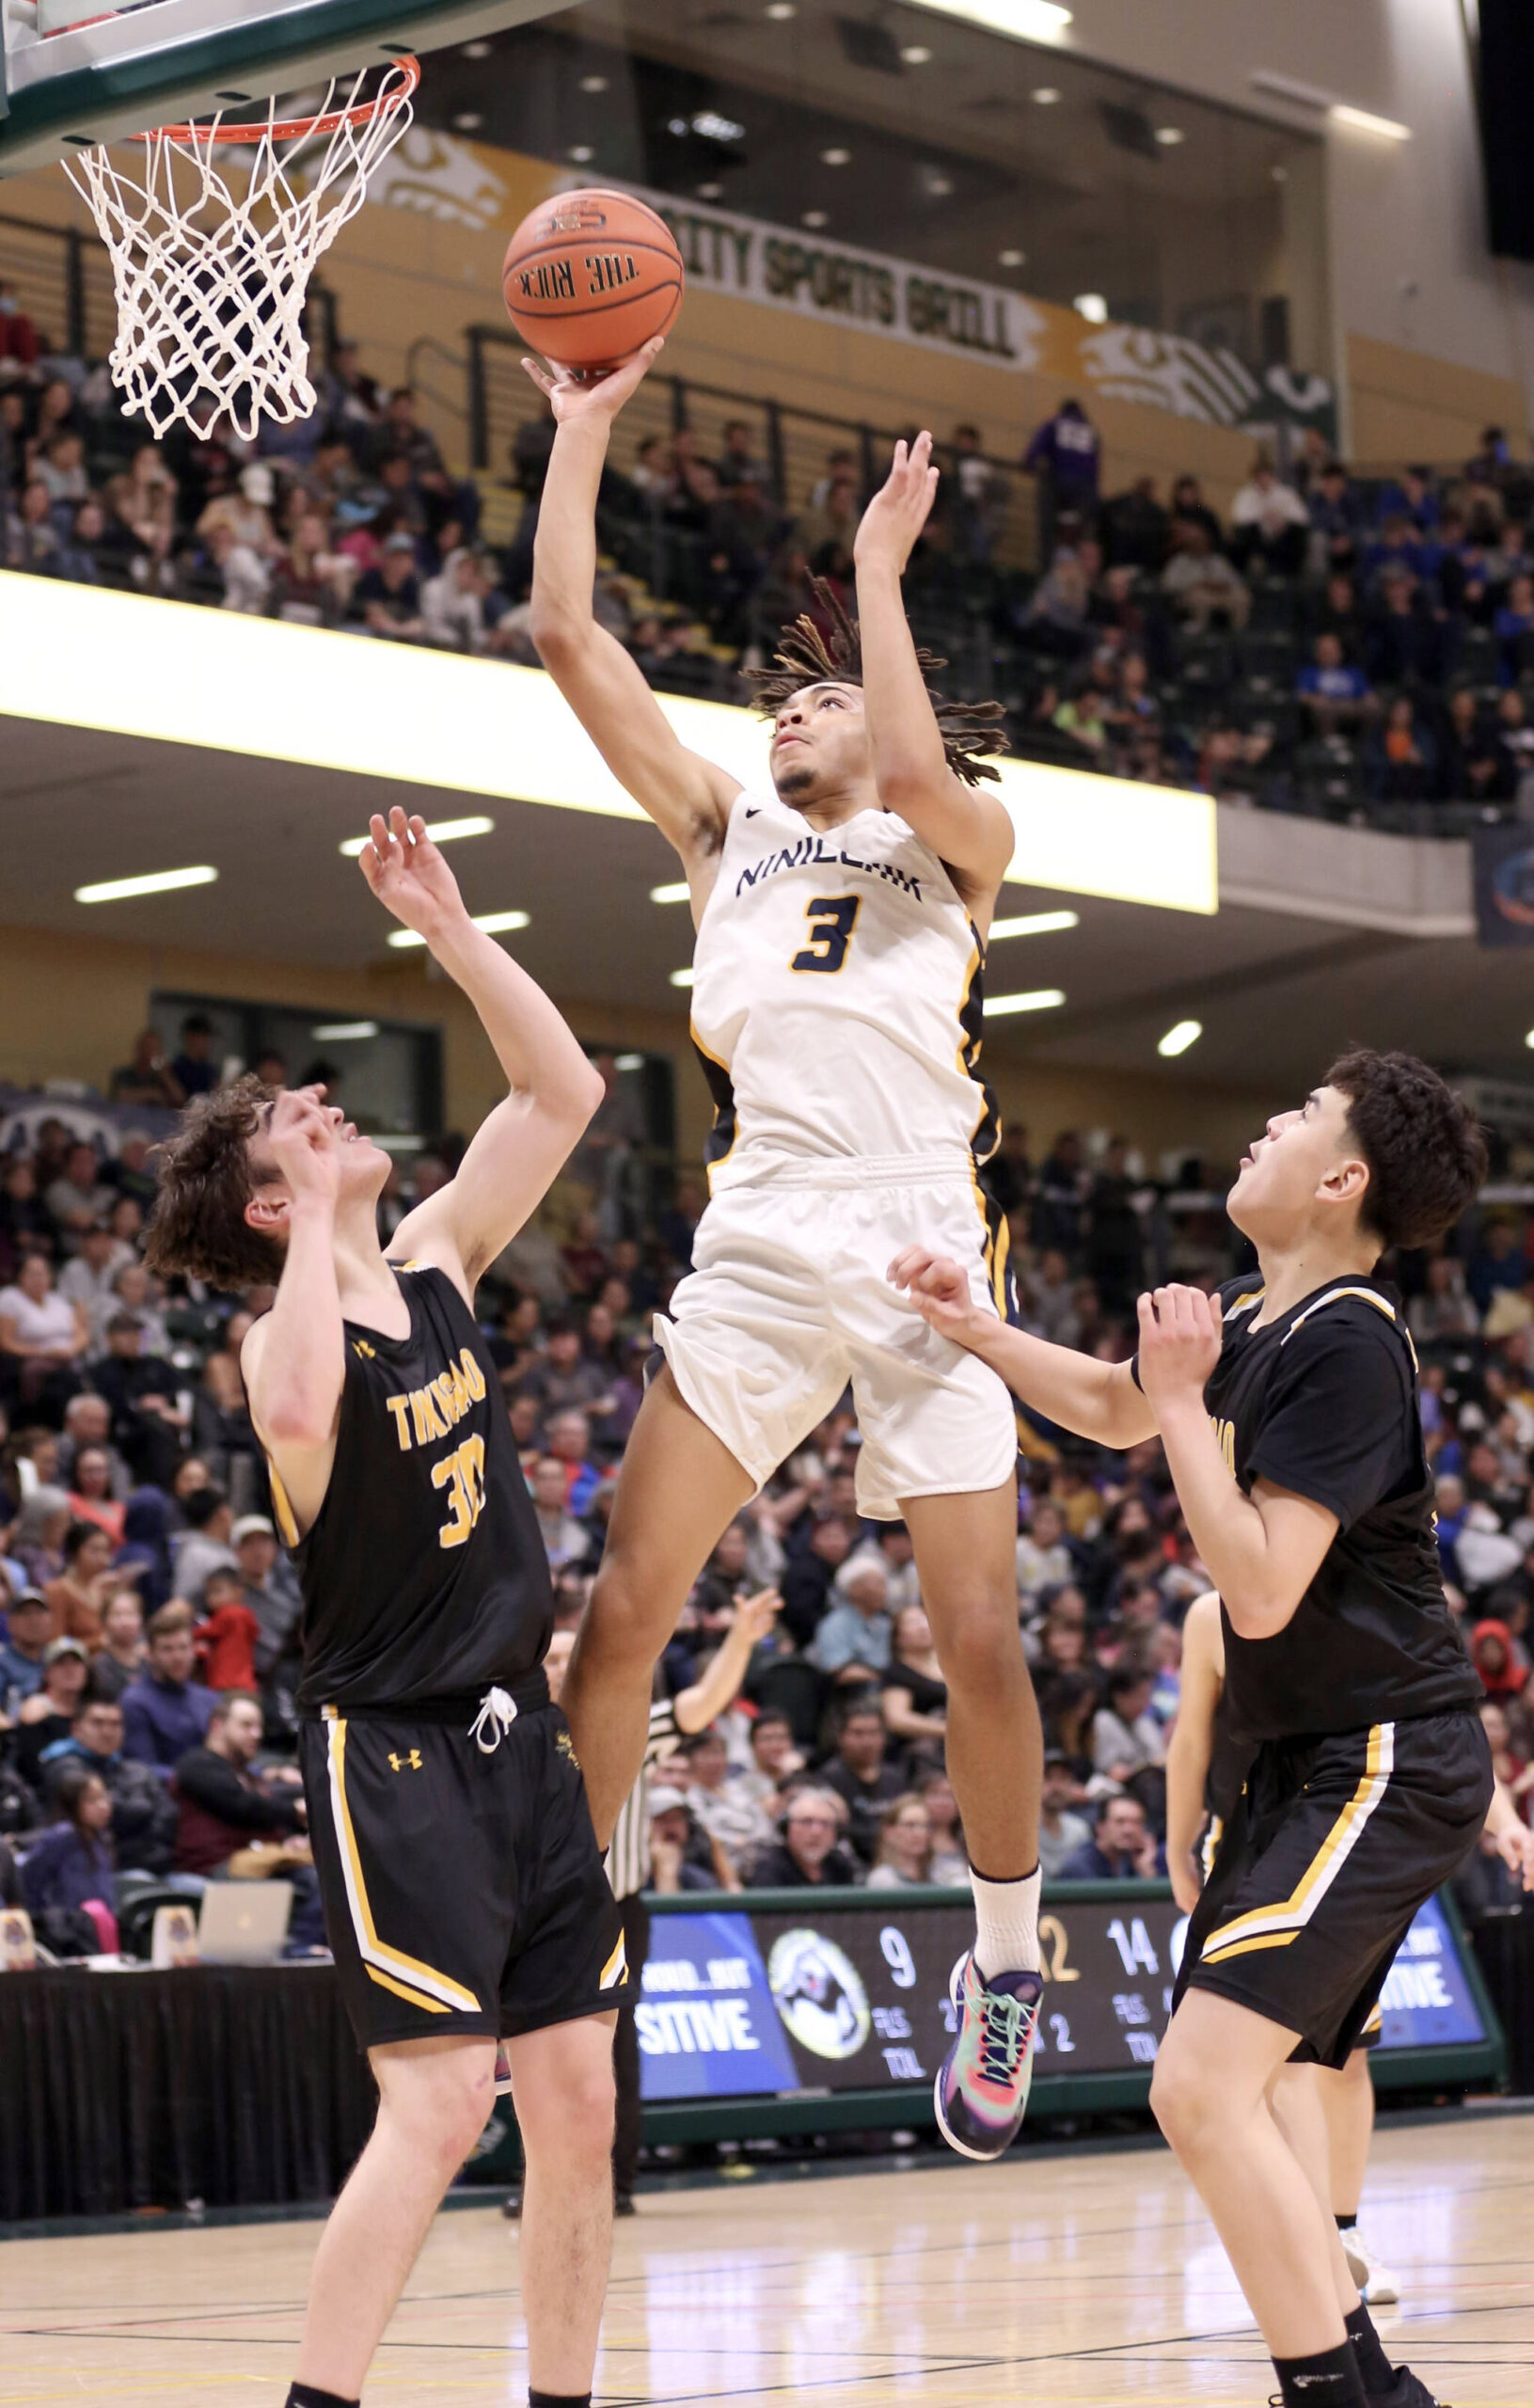 Ninilchik’s Jaylin Scott soars to the basket against Tikigaq during the Class 2A boys state championship Saturday, March 18, 2023, at the Alaska Airlines Center in Anchorage, Alaska. (Photo courtesy of Robin Moore)